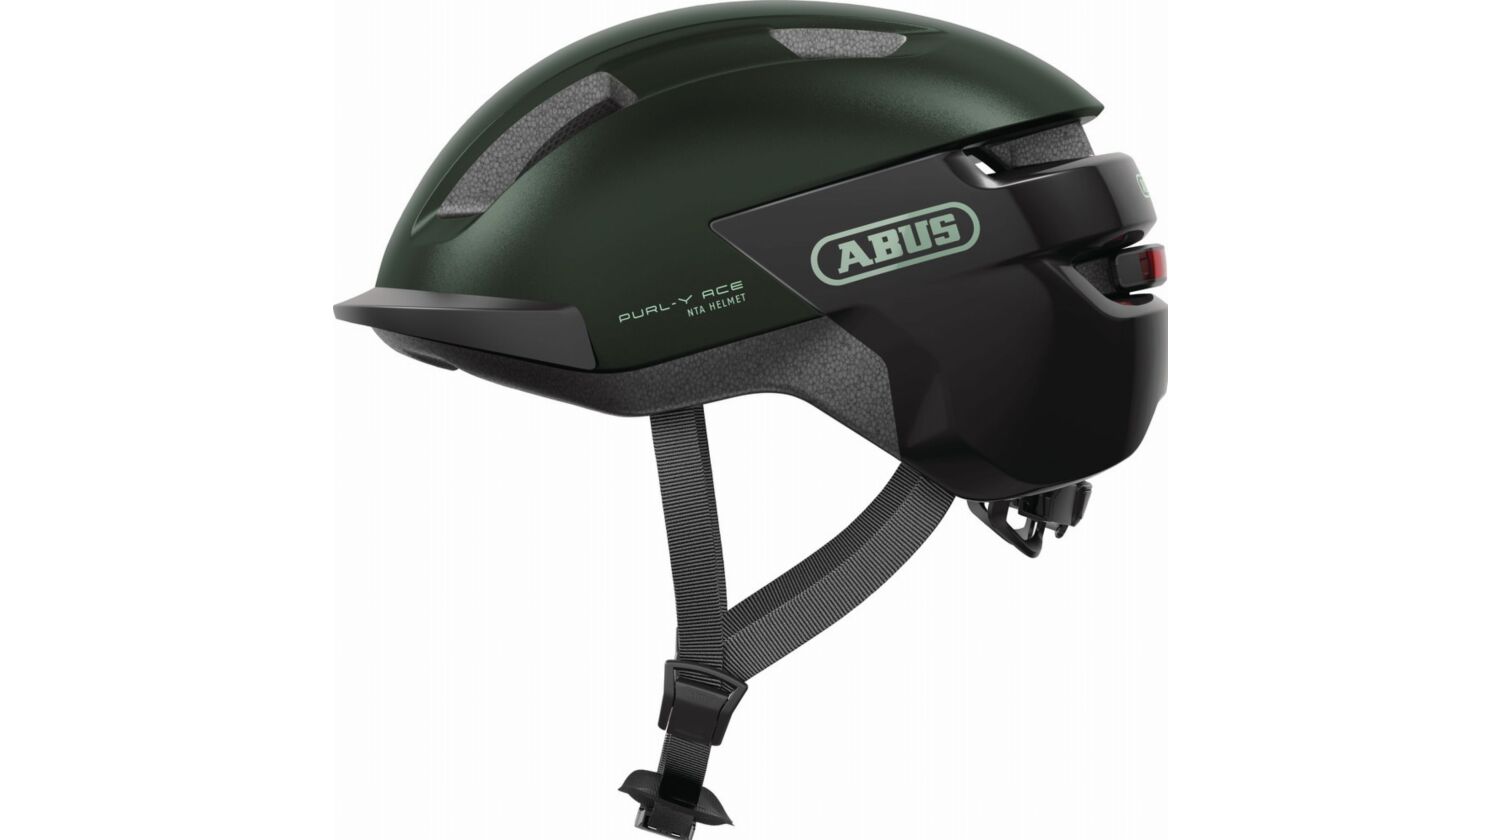 Abus Purl-Y Ace Helm moss green